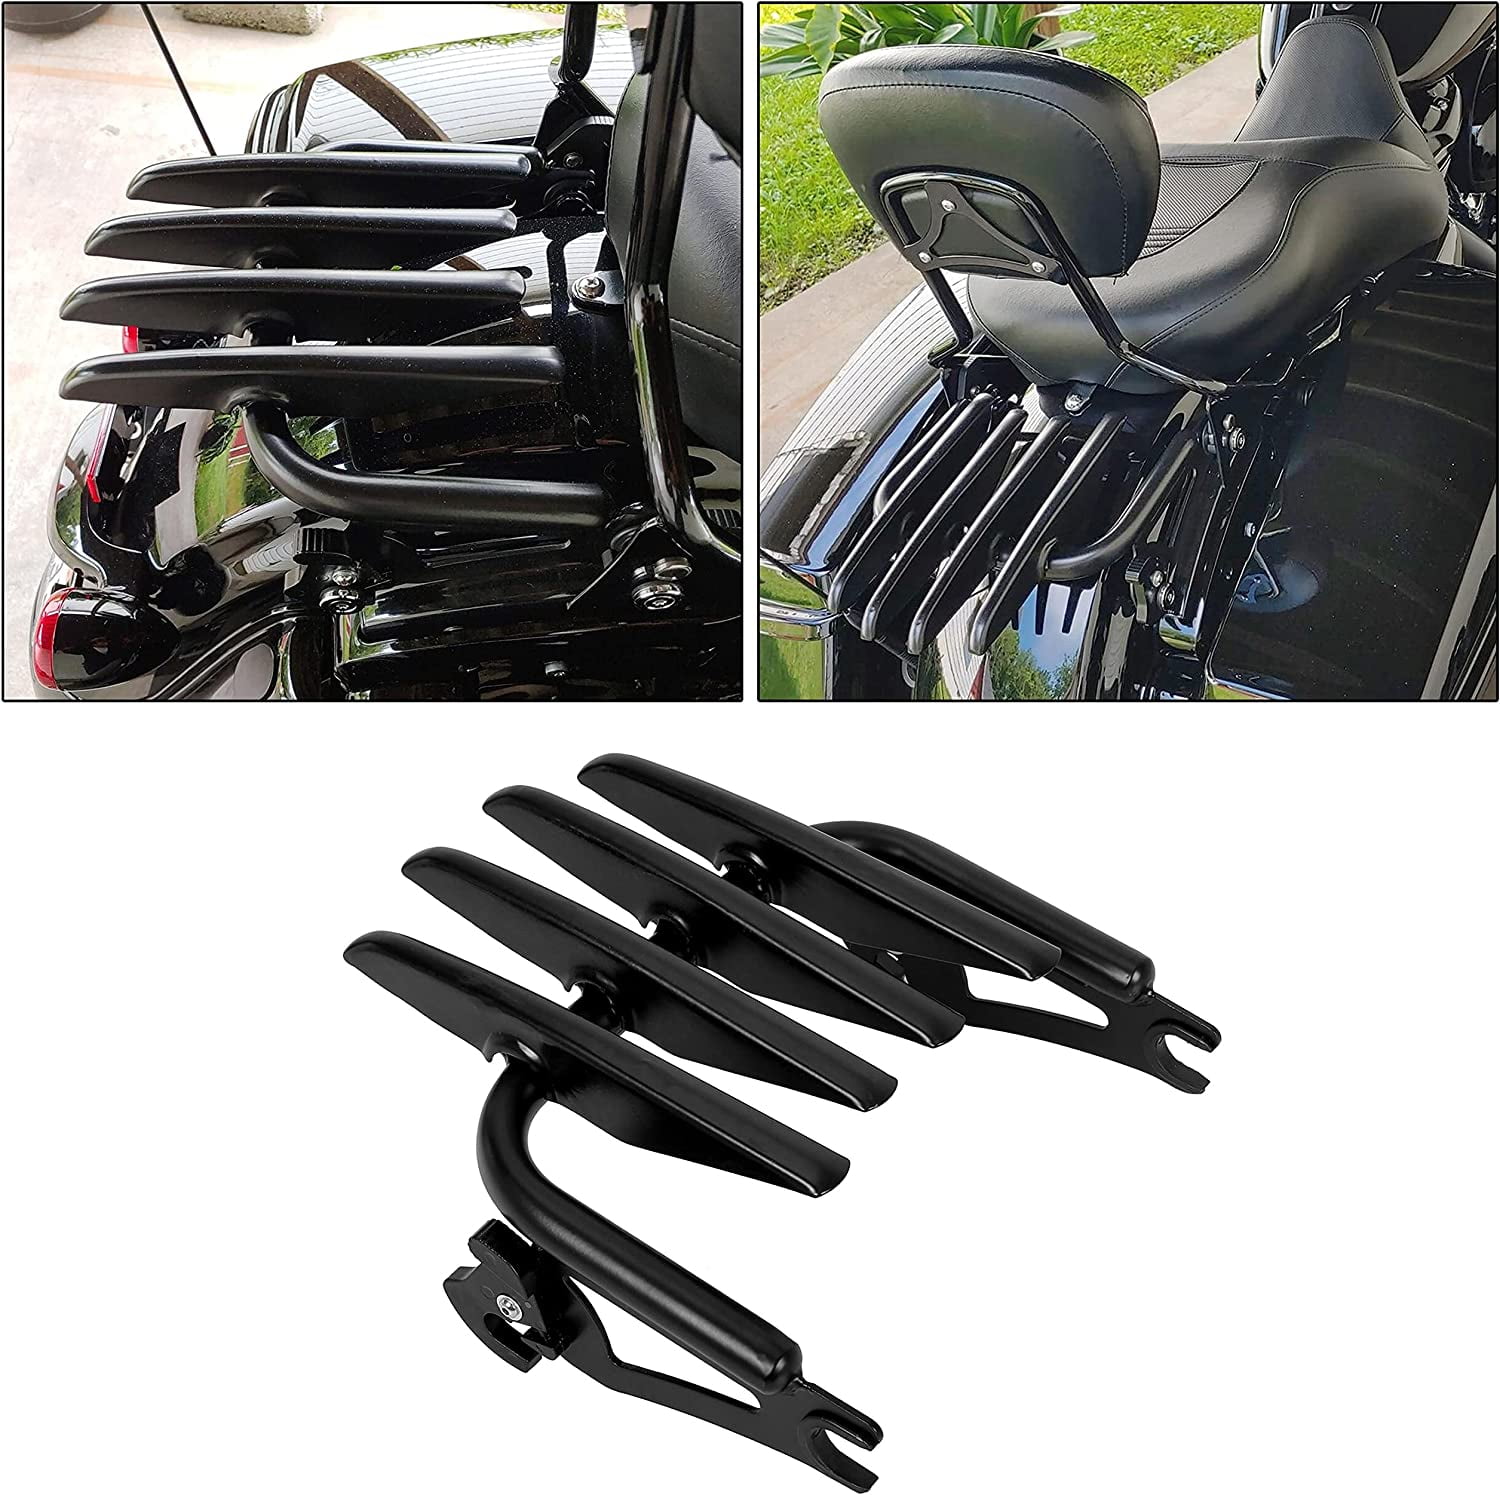 ECOTRIC Black Detachable Stealth Luggage Rack For Harley Touring Road King FLHR FLTR 2009-2018 New 